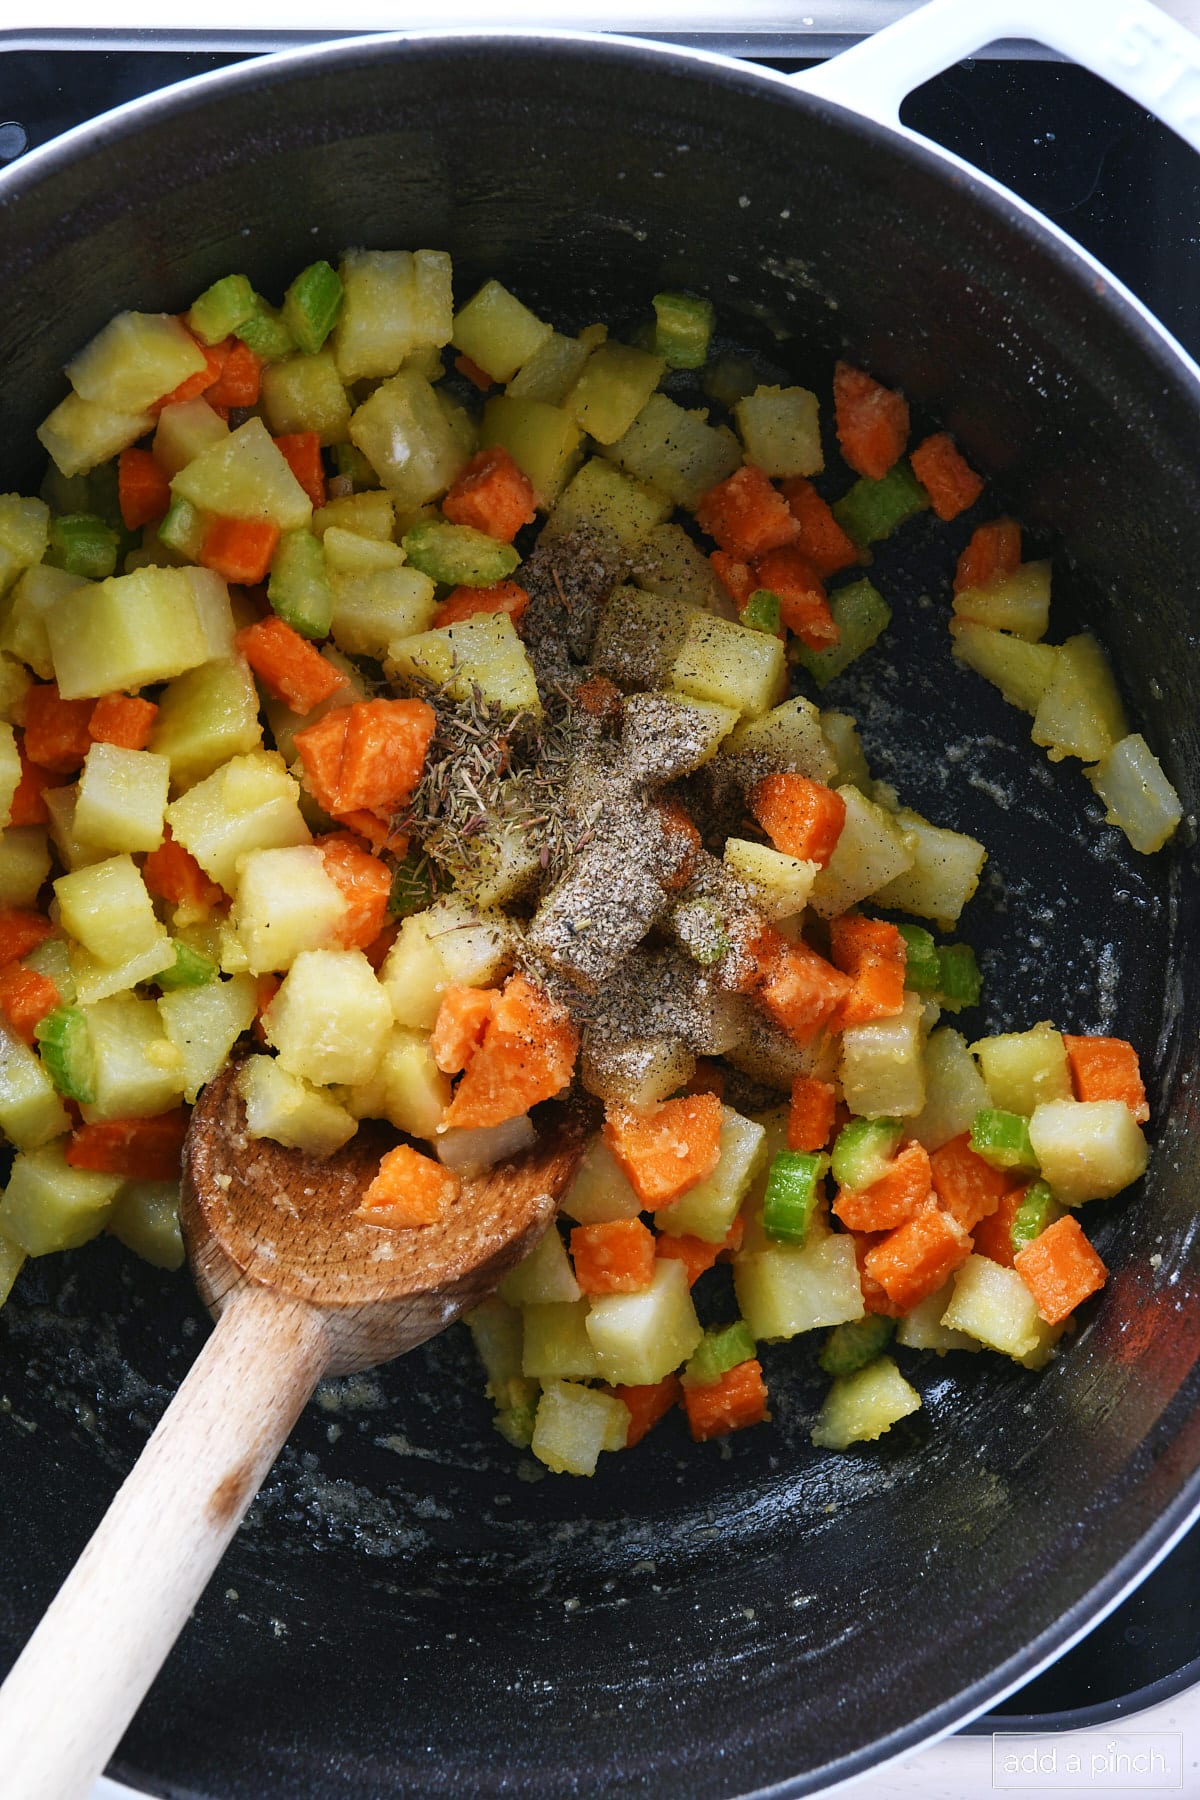 Seasonings added to potatoes, carrots, and celery in a Dutch oven.